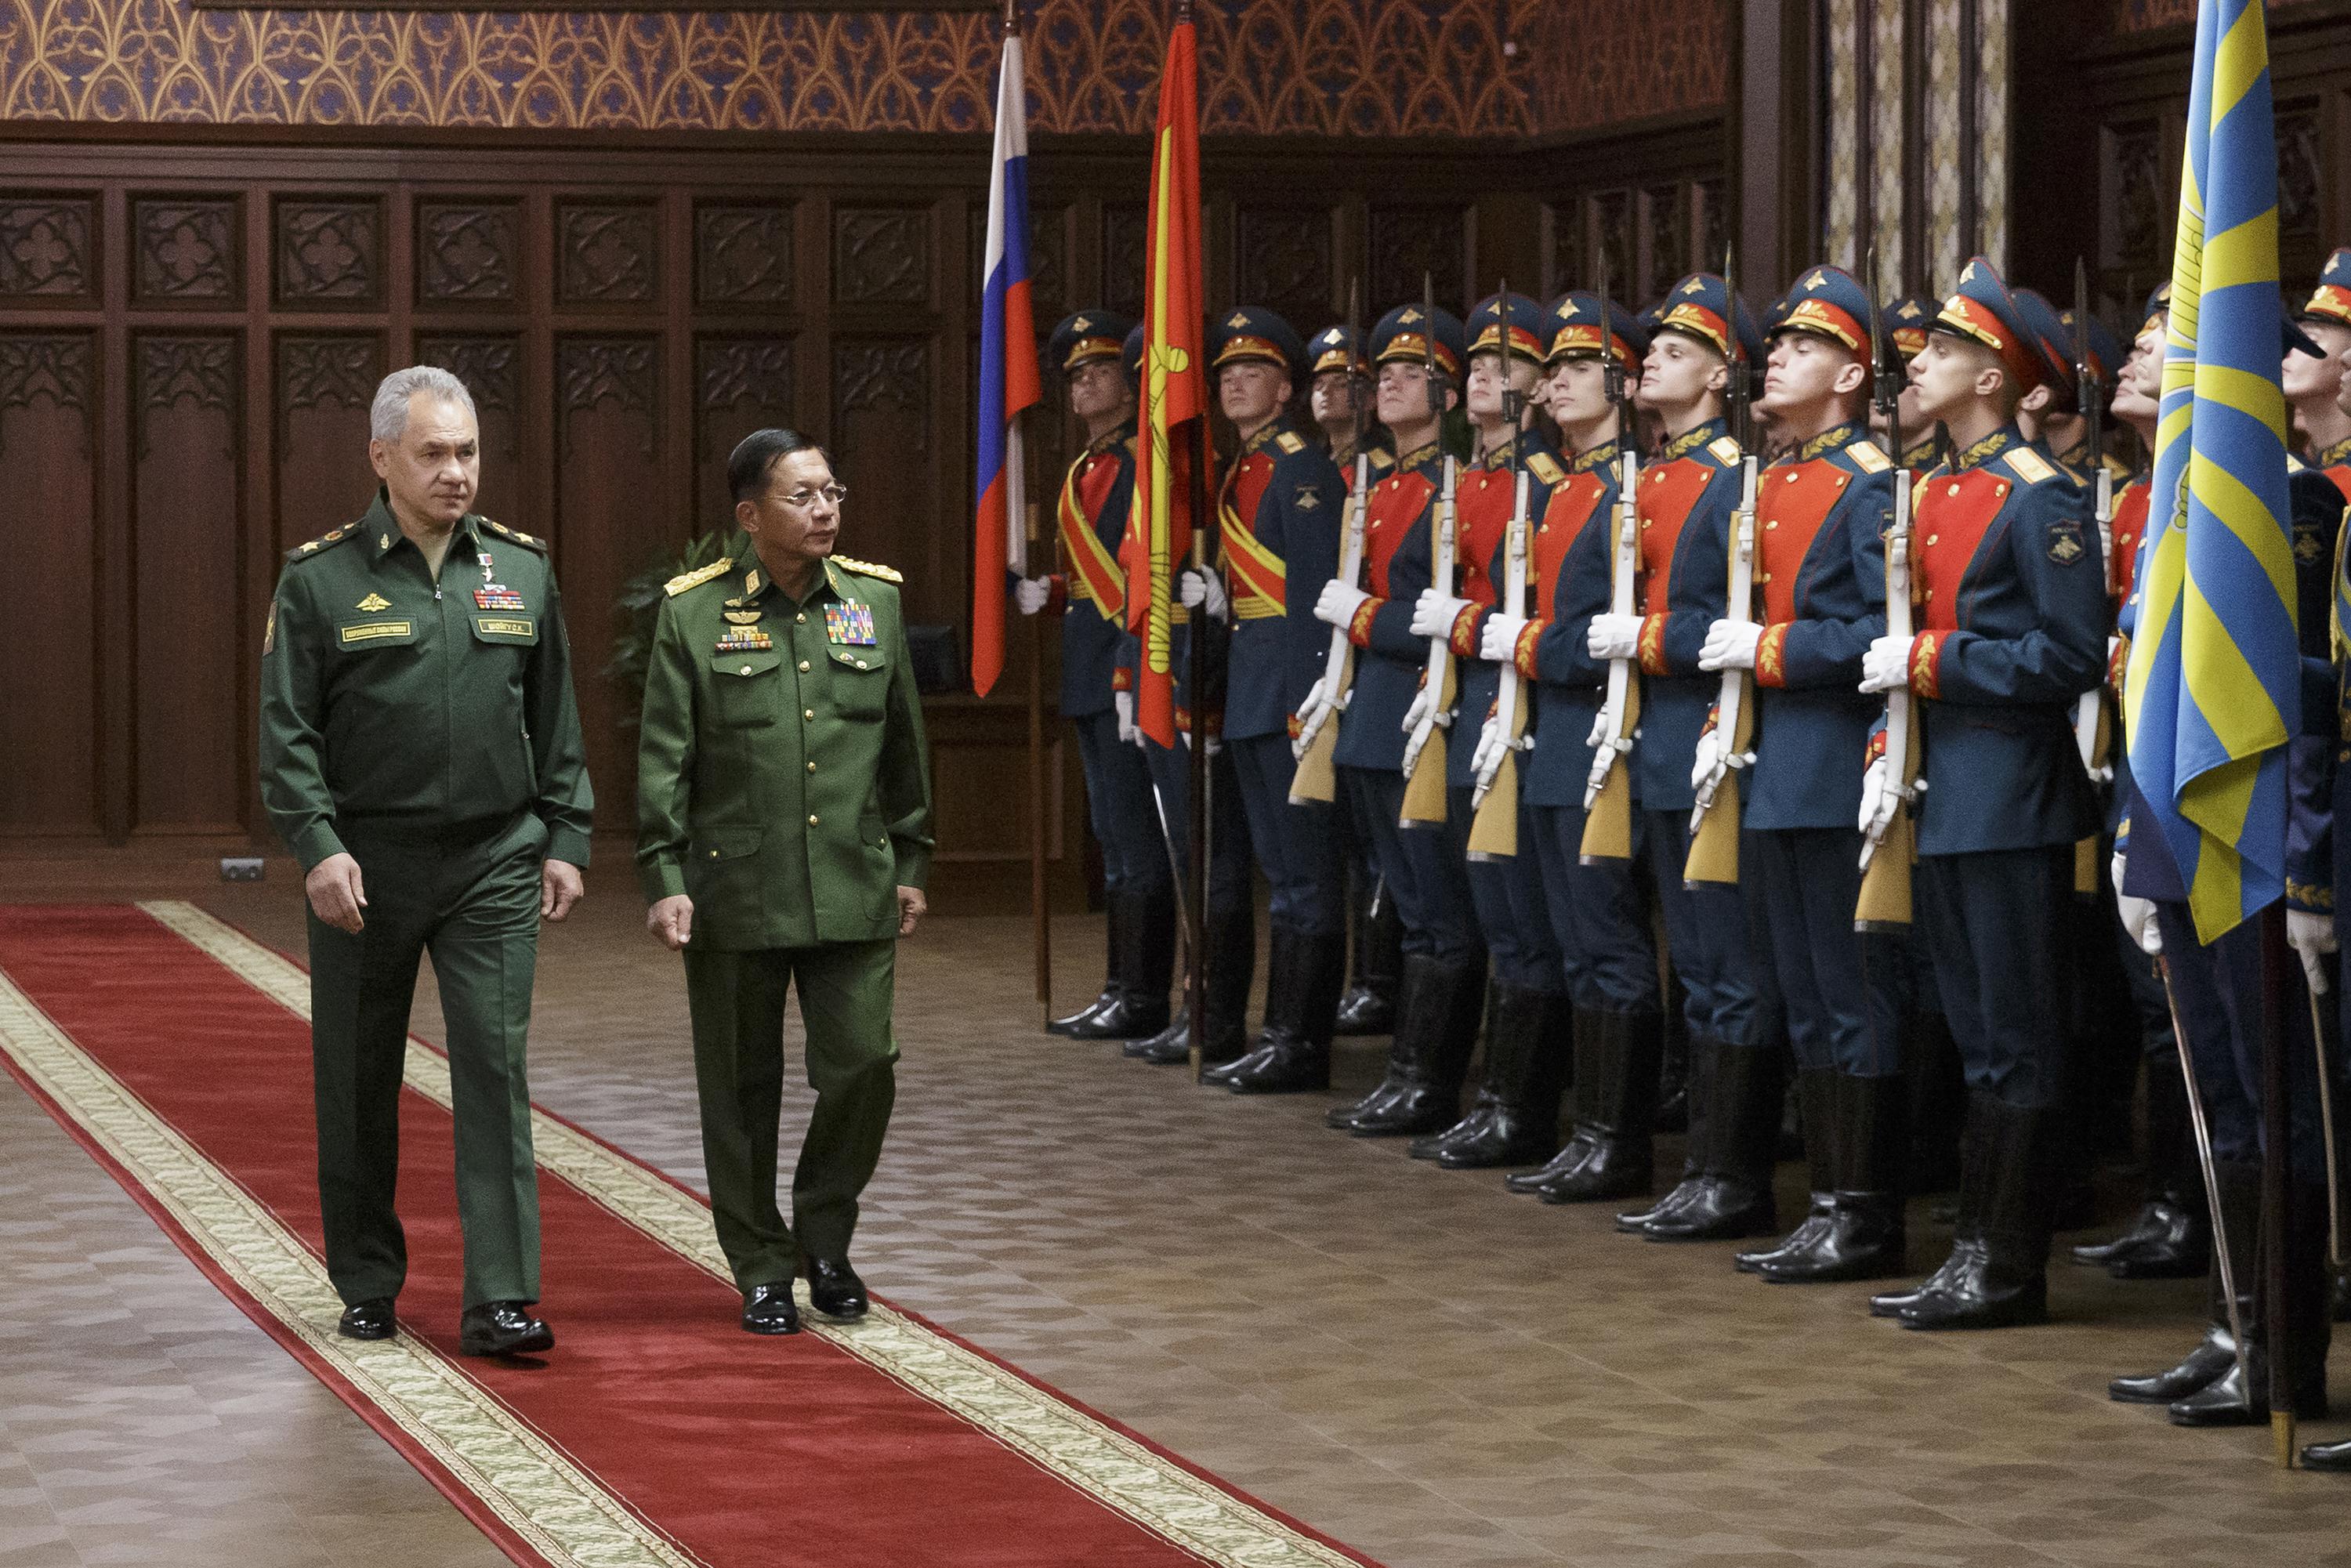 Myanmar's junta leader attends military conference in Moscow | AP News